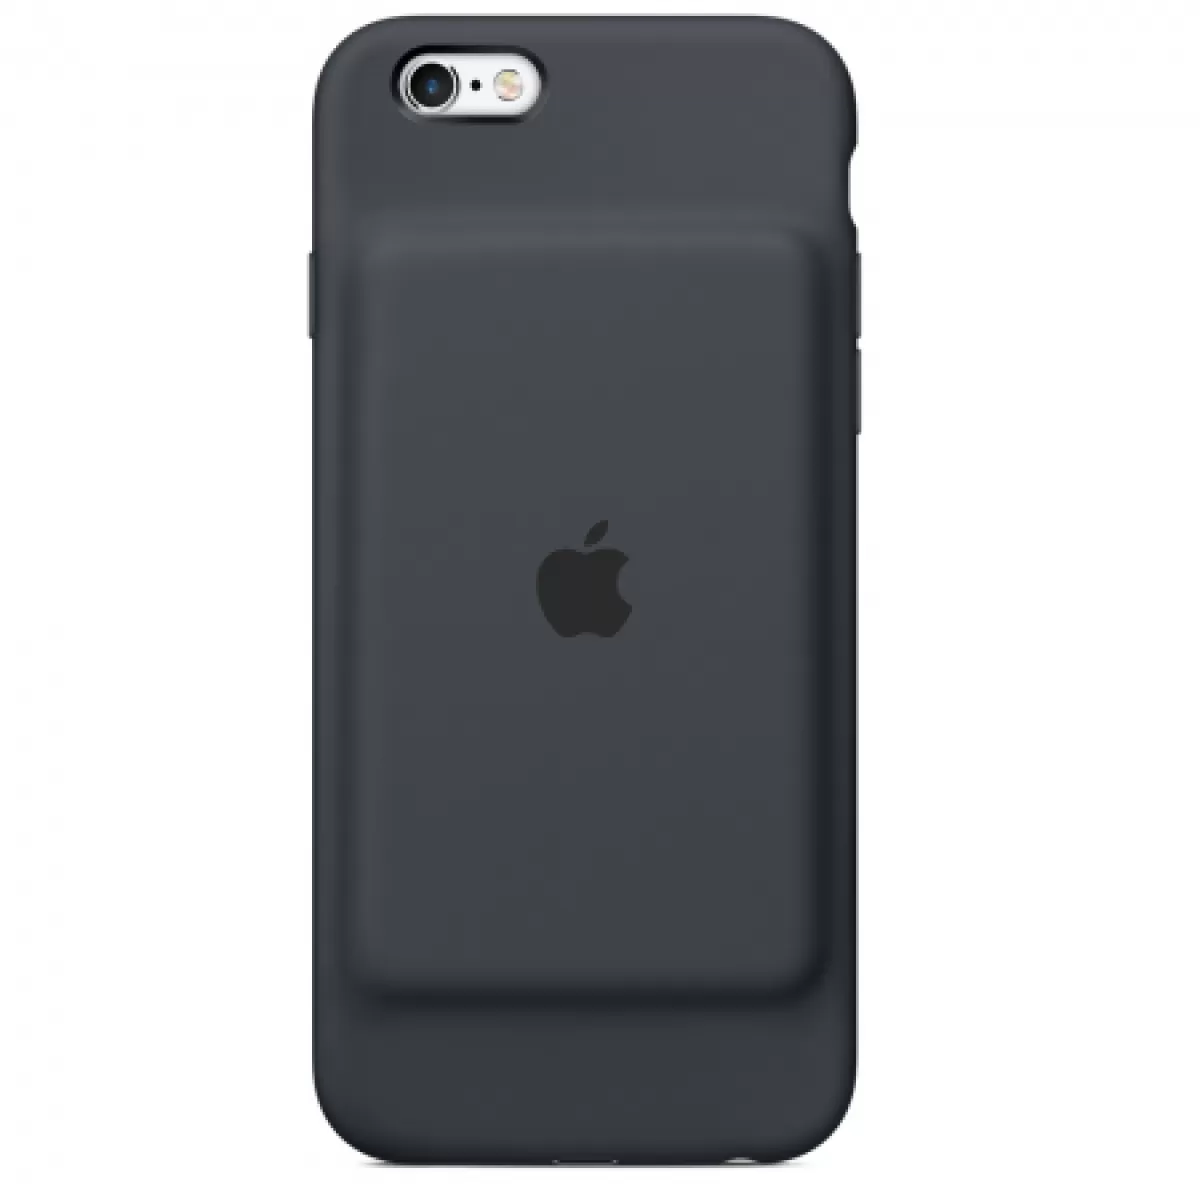 Apple iPhone 6s Smart Battery Case Charcoal Gray